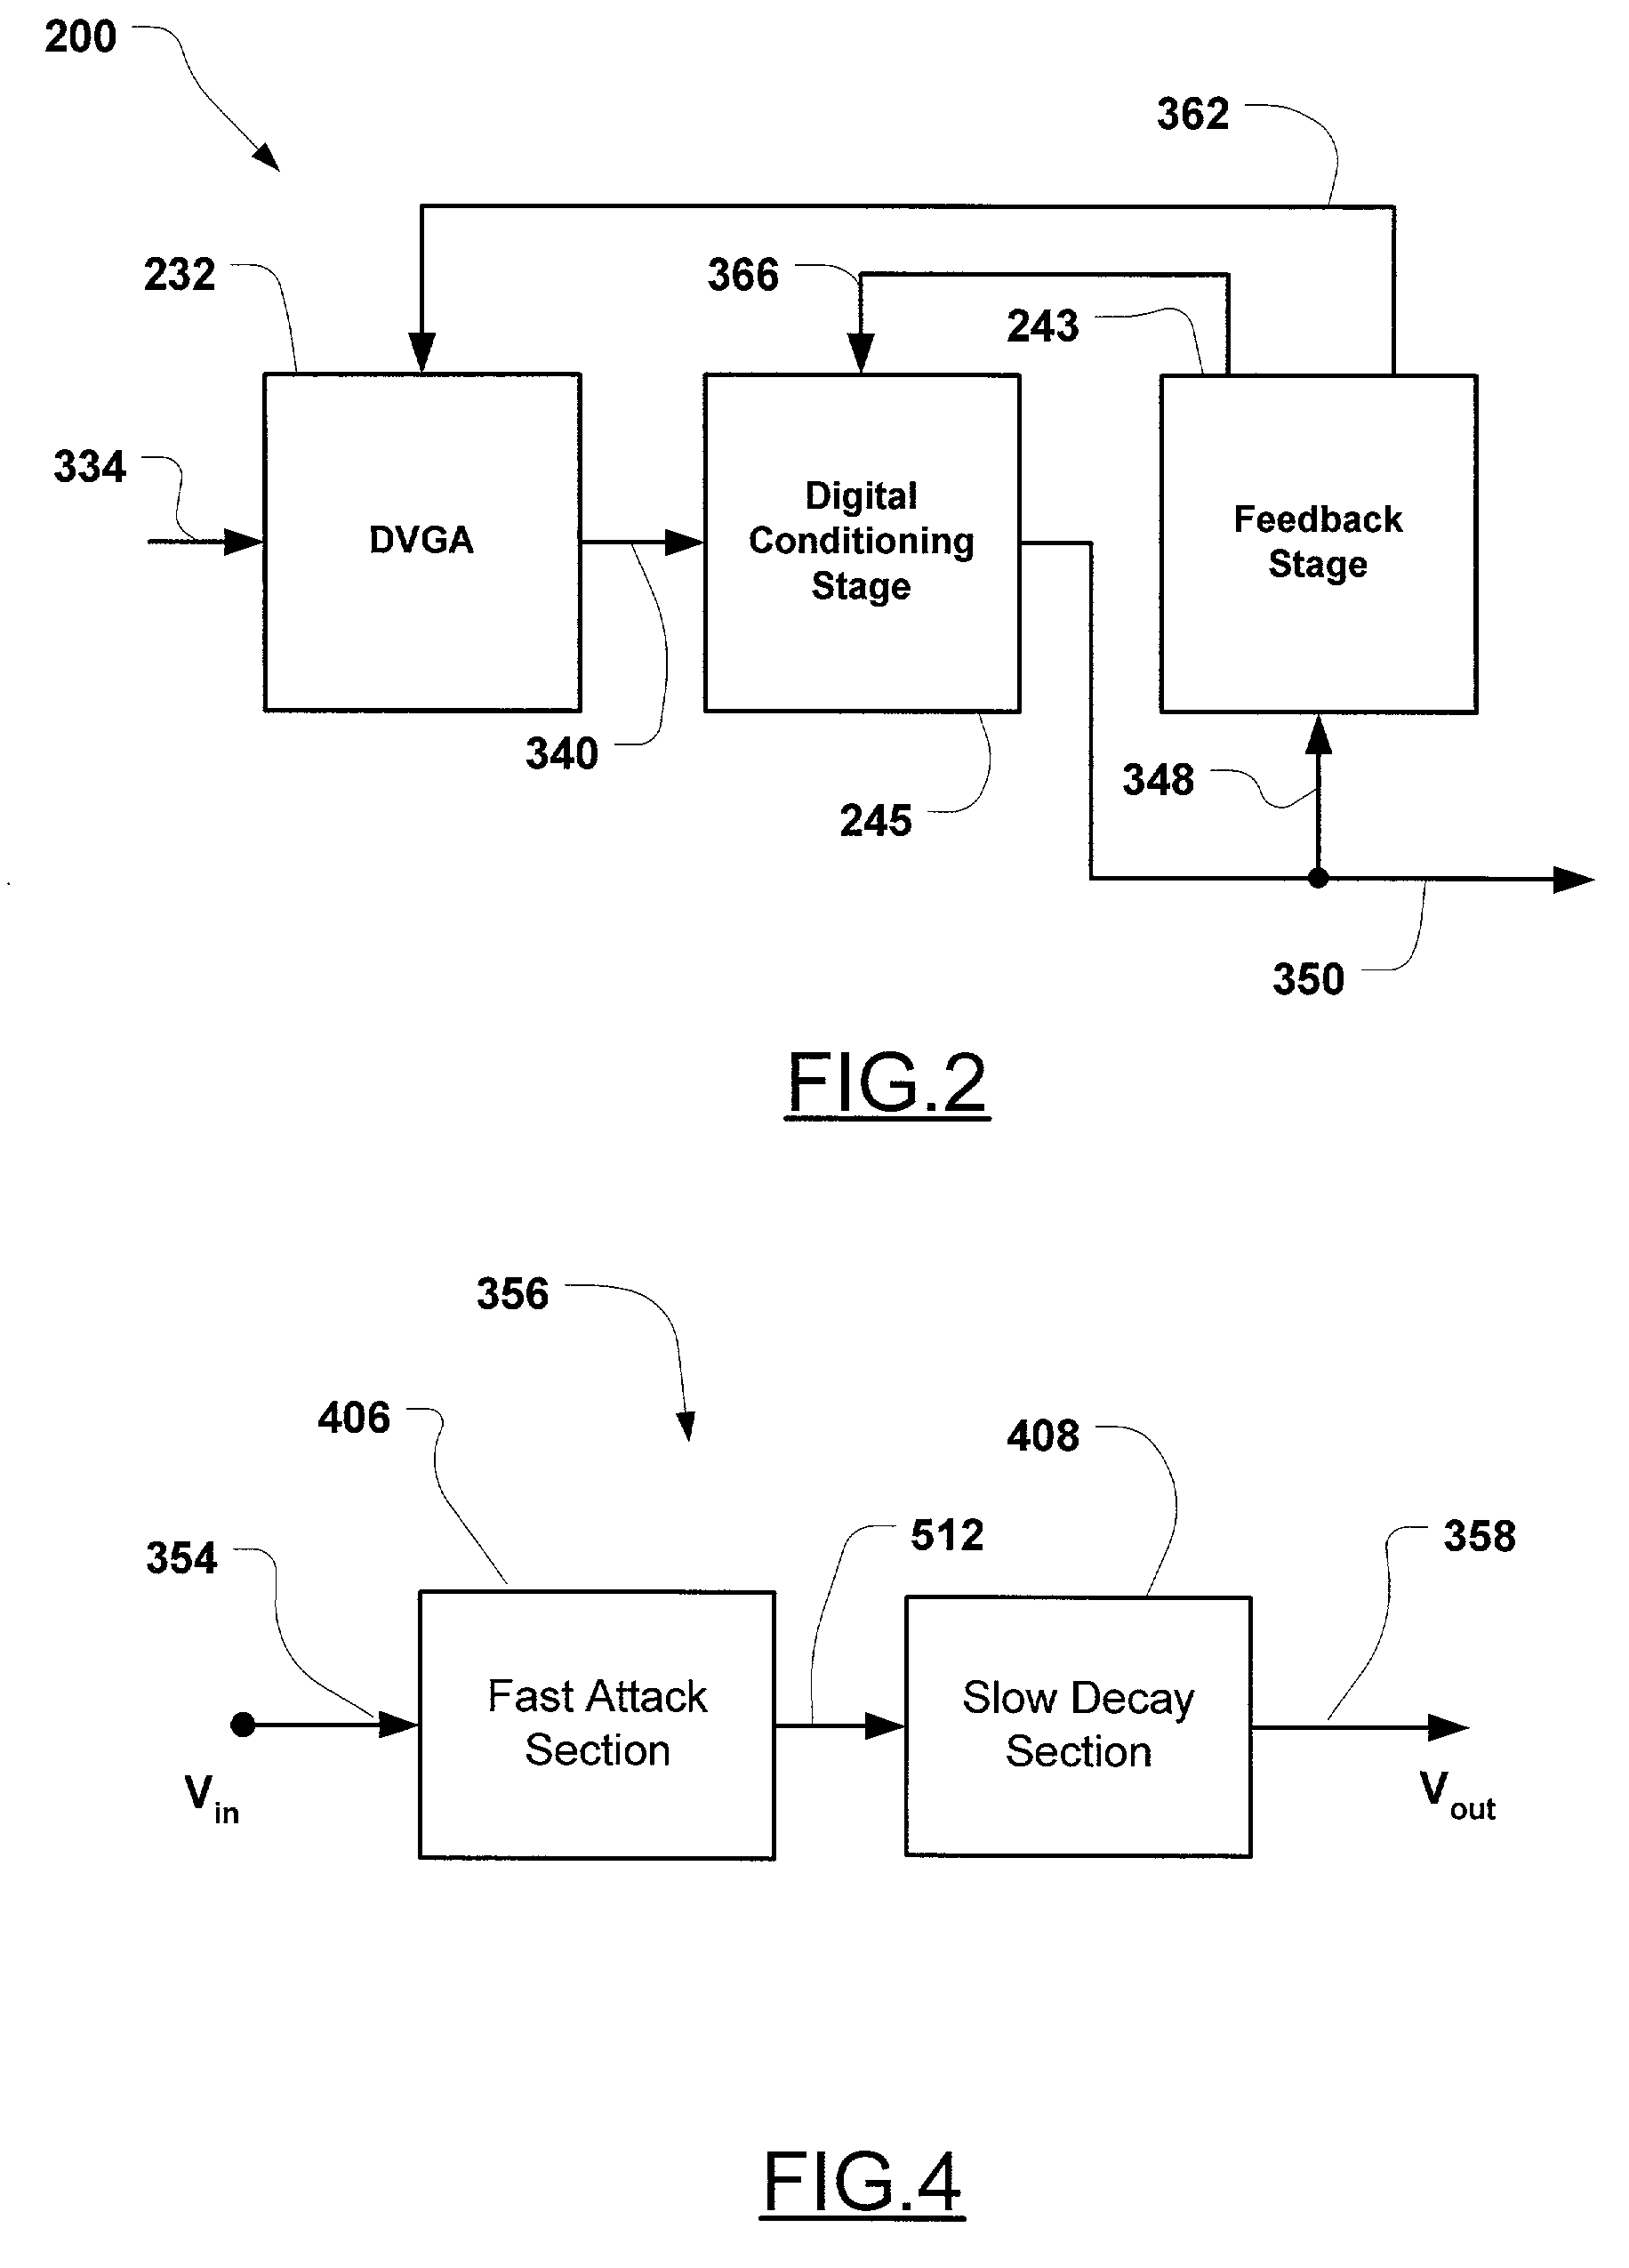 Two-stage non-linear filter for analog signal gain control in an OFDM receiver